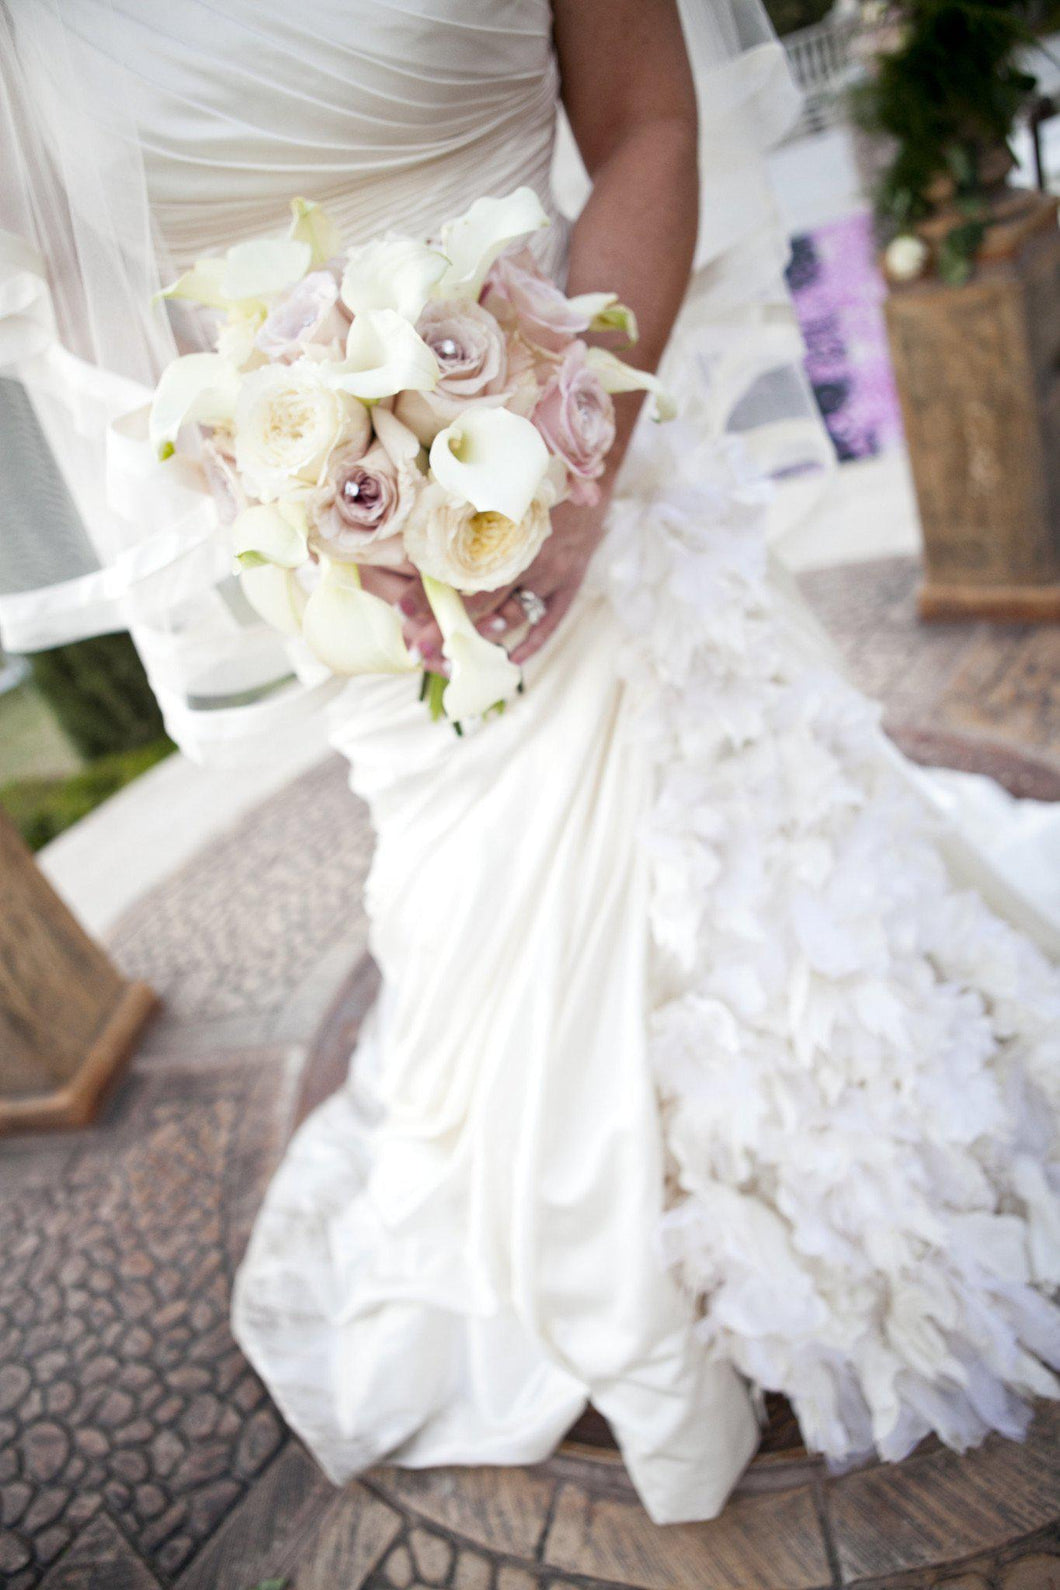 Pnina Tornai Ruched Gown with Floral Inset - Pnina Tornai - Nearly Newlywed Bridal Boutique - 1